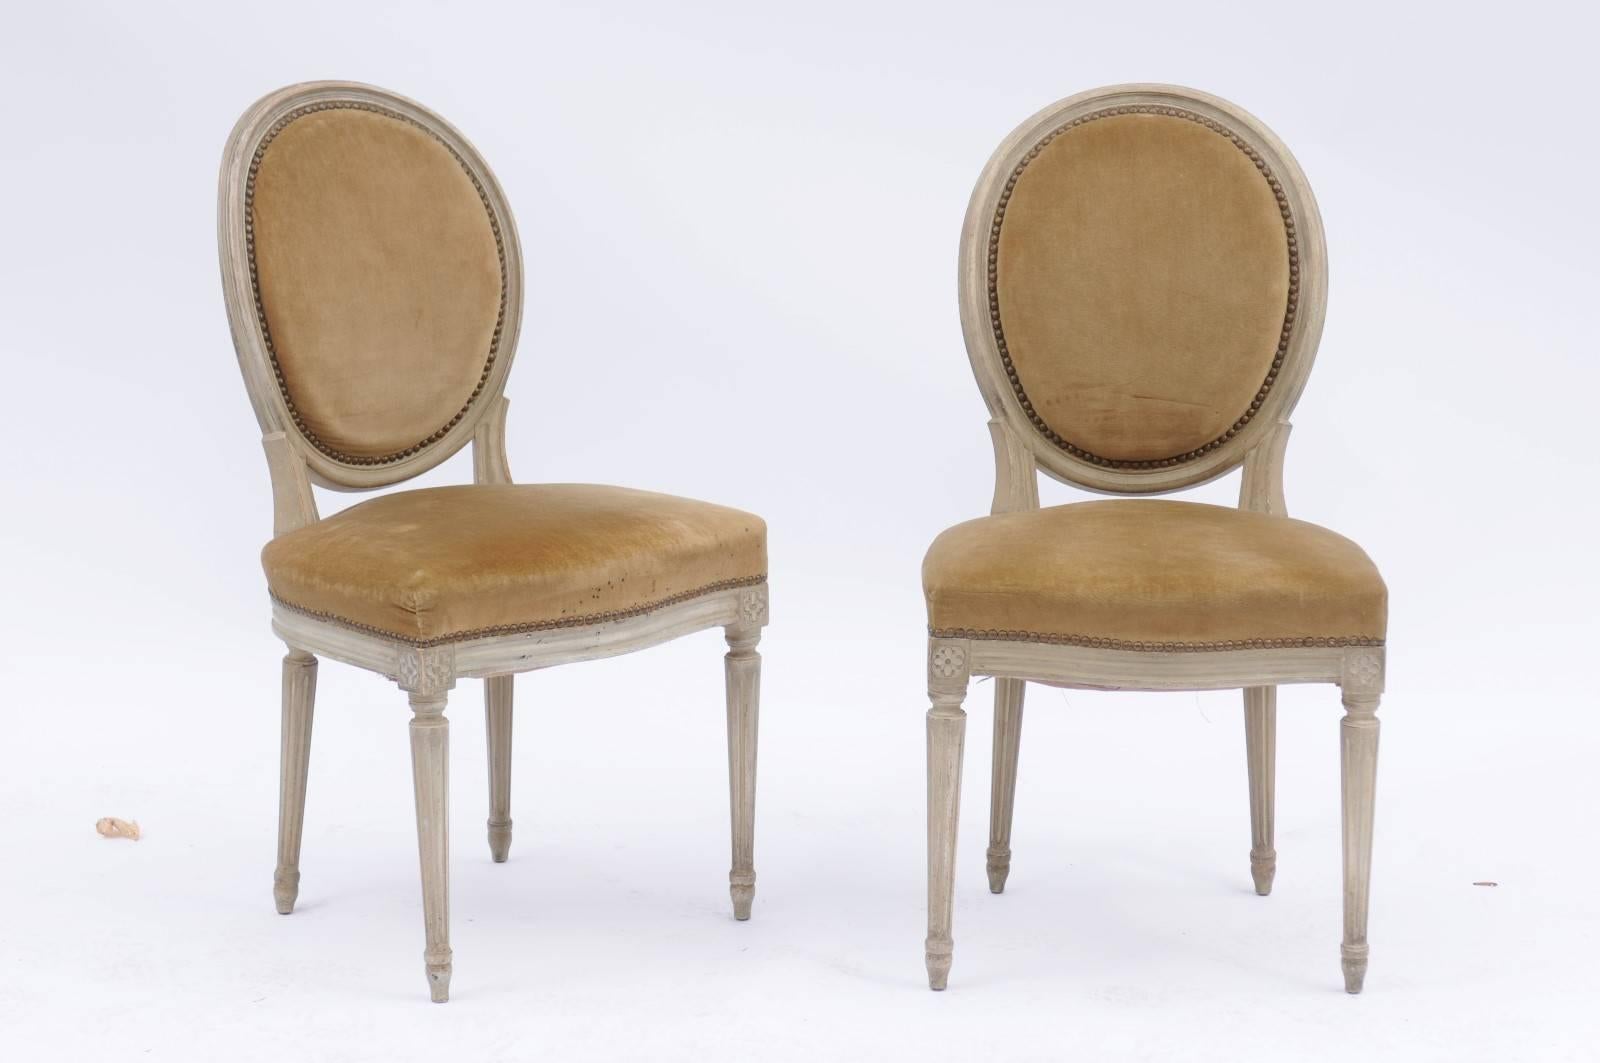 A pair of French Louis XVI style painted wood side chairs from the early 20th century with oval backs, original upholstery, nailhead trim, carved rosettes and fluted legs. We currently have one pair available, priced and sold per pair: $775. The